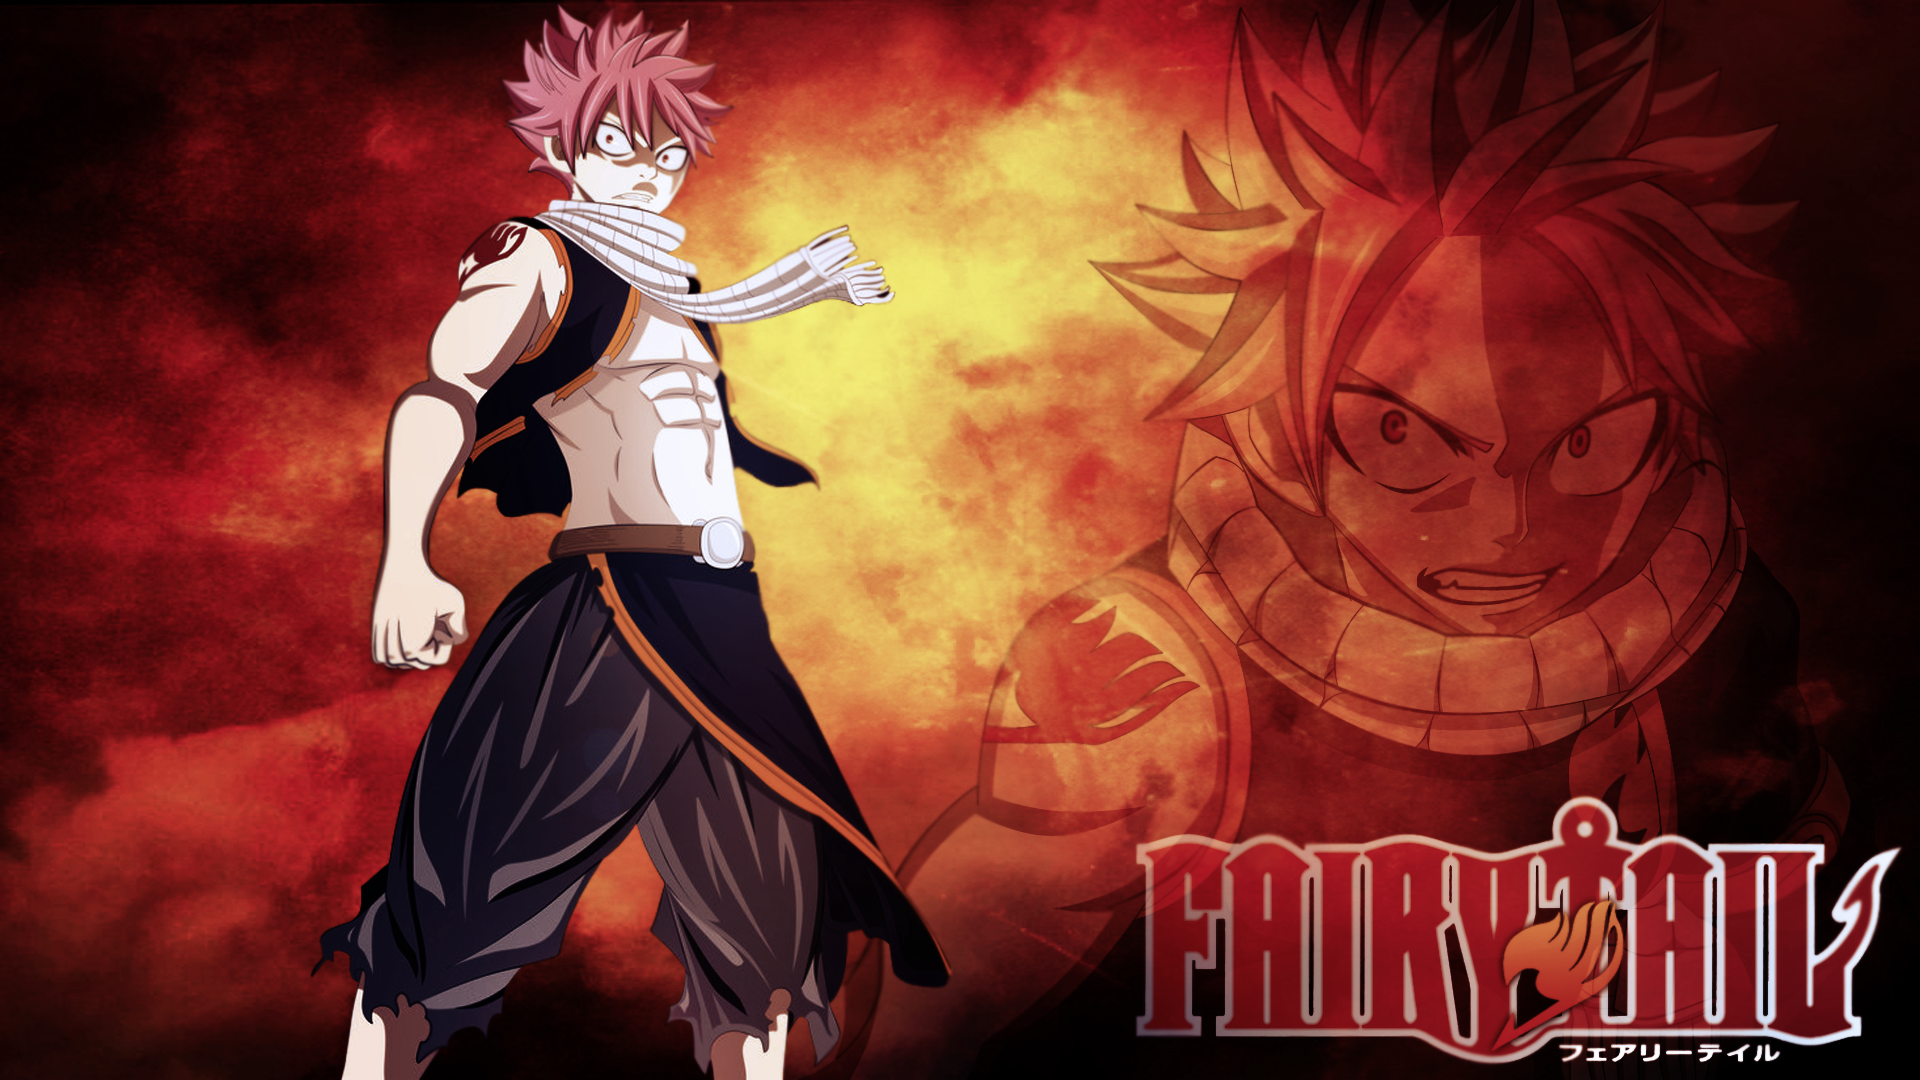 Free Download Fairy Tail Wallpaper Background Hd 5910 Wallpaper Cool 19x1080 For Your Desktop Mobile Tablet Explore 78 Fairytail Wallpaper Fairy Tail Logo Wallpaper Fairy Wallpaper Fairy Background Wallpaper